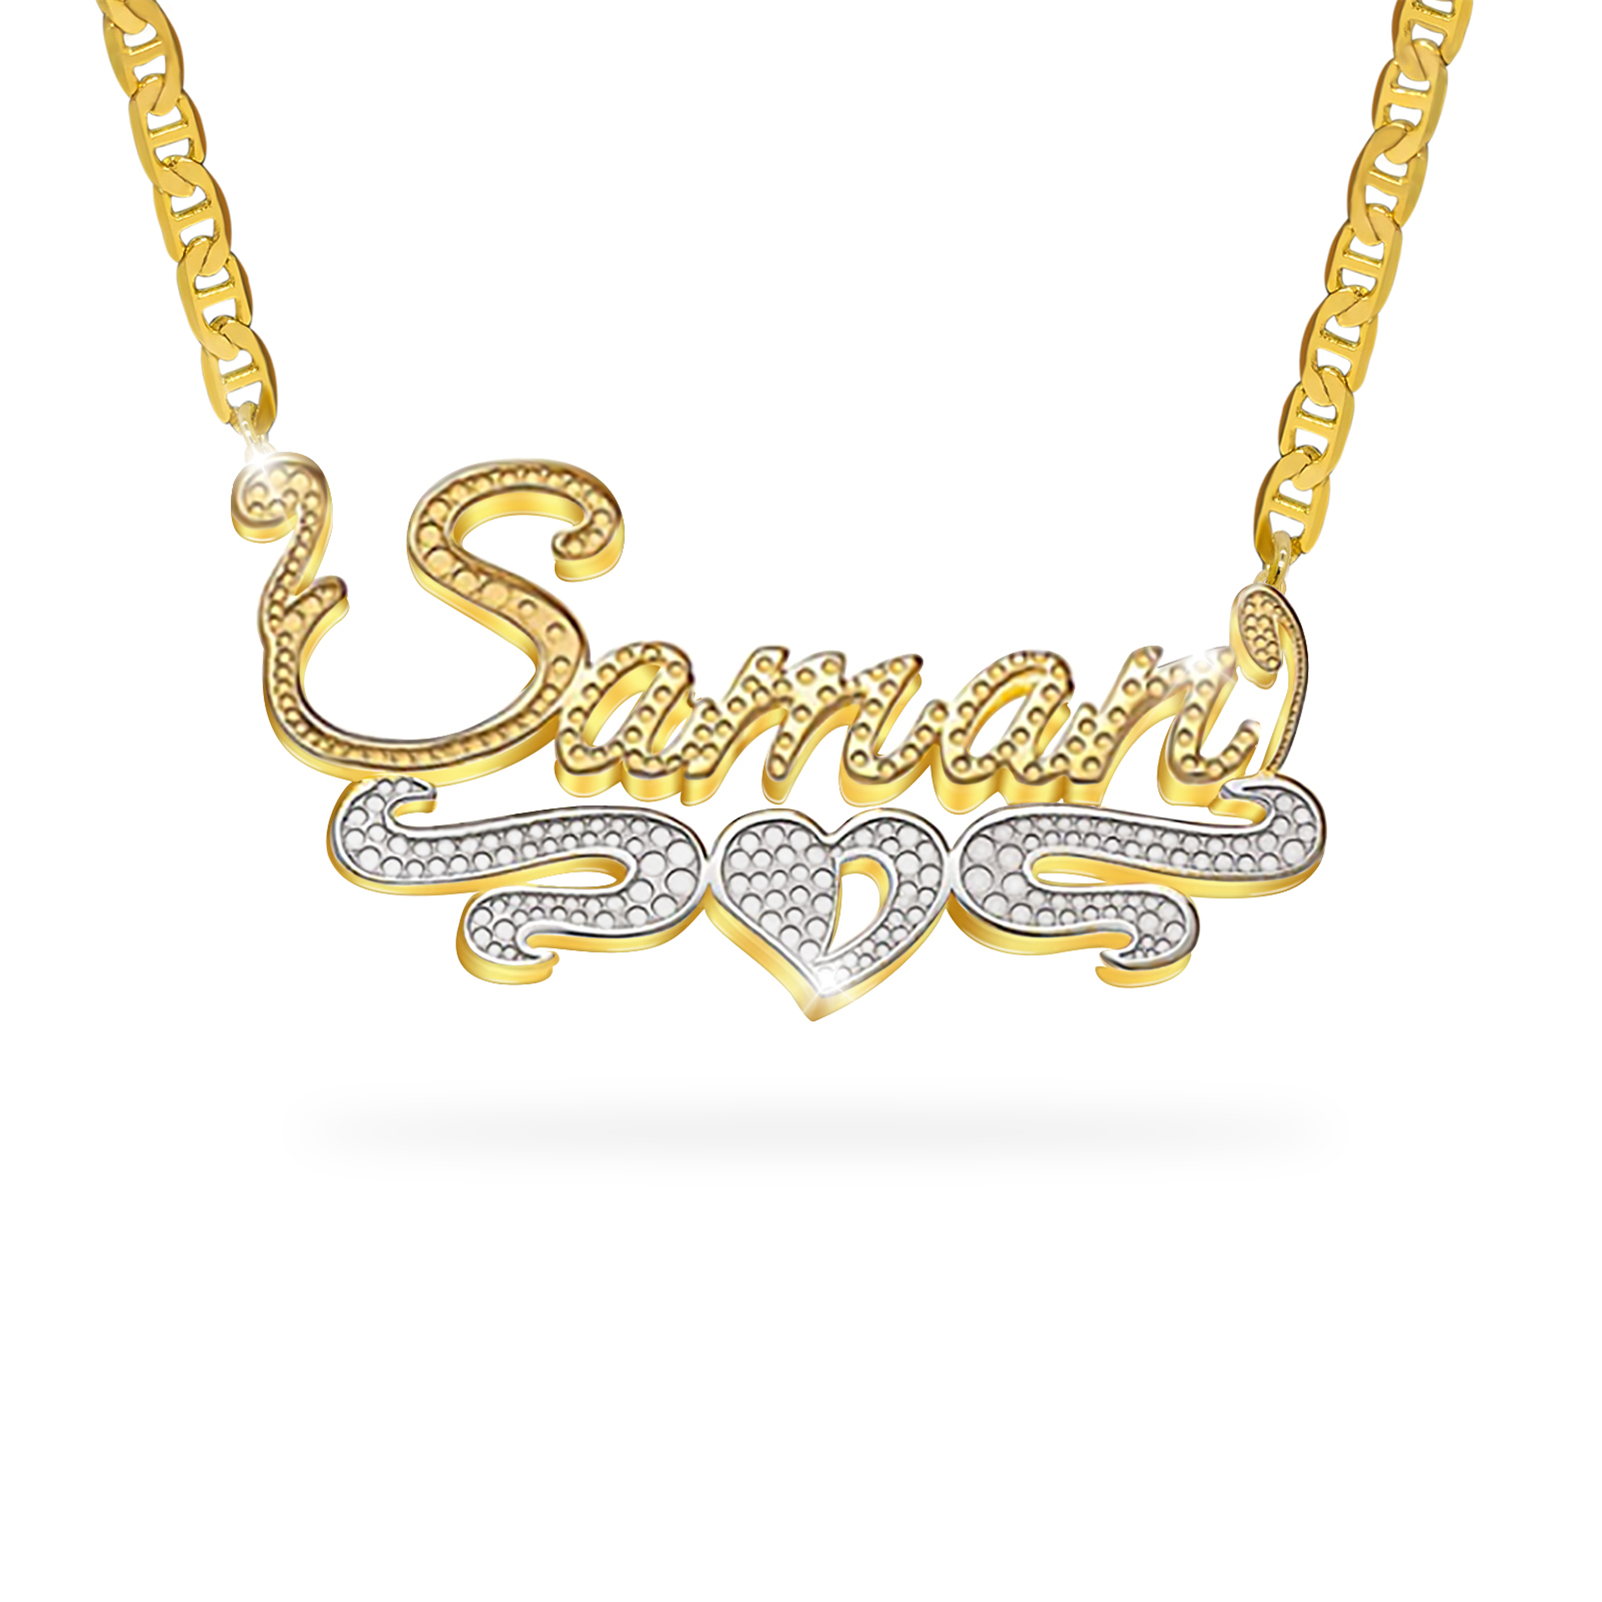 NL4-4 Double Plated Name Necklace Personalized Custom Nameplate Pendant Necklace